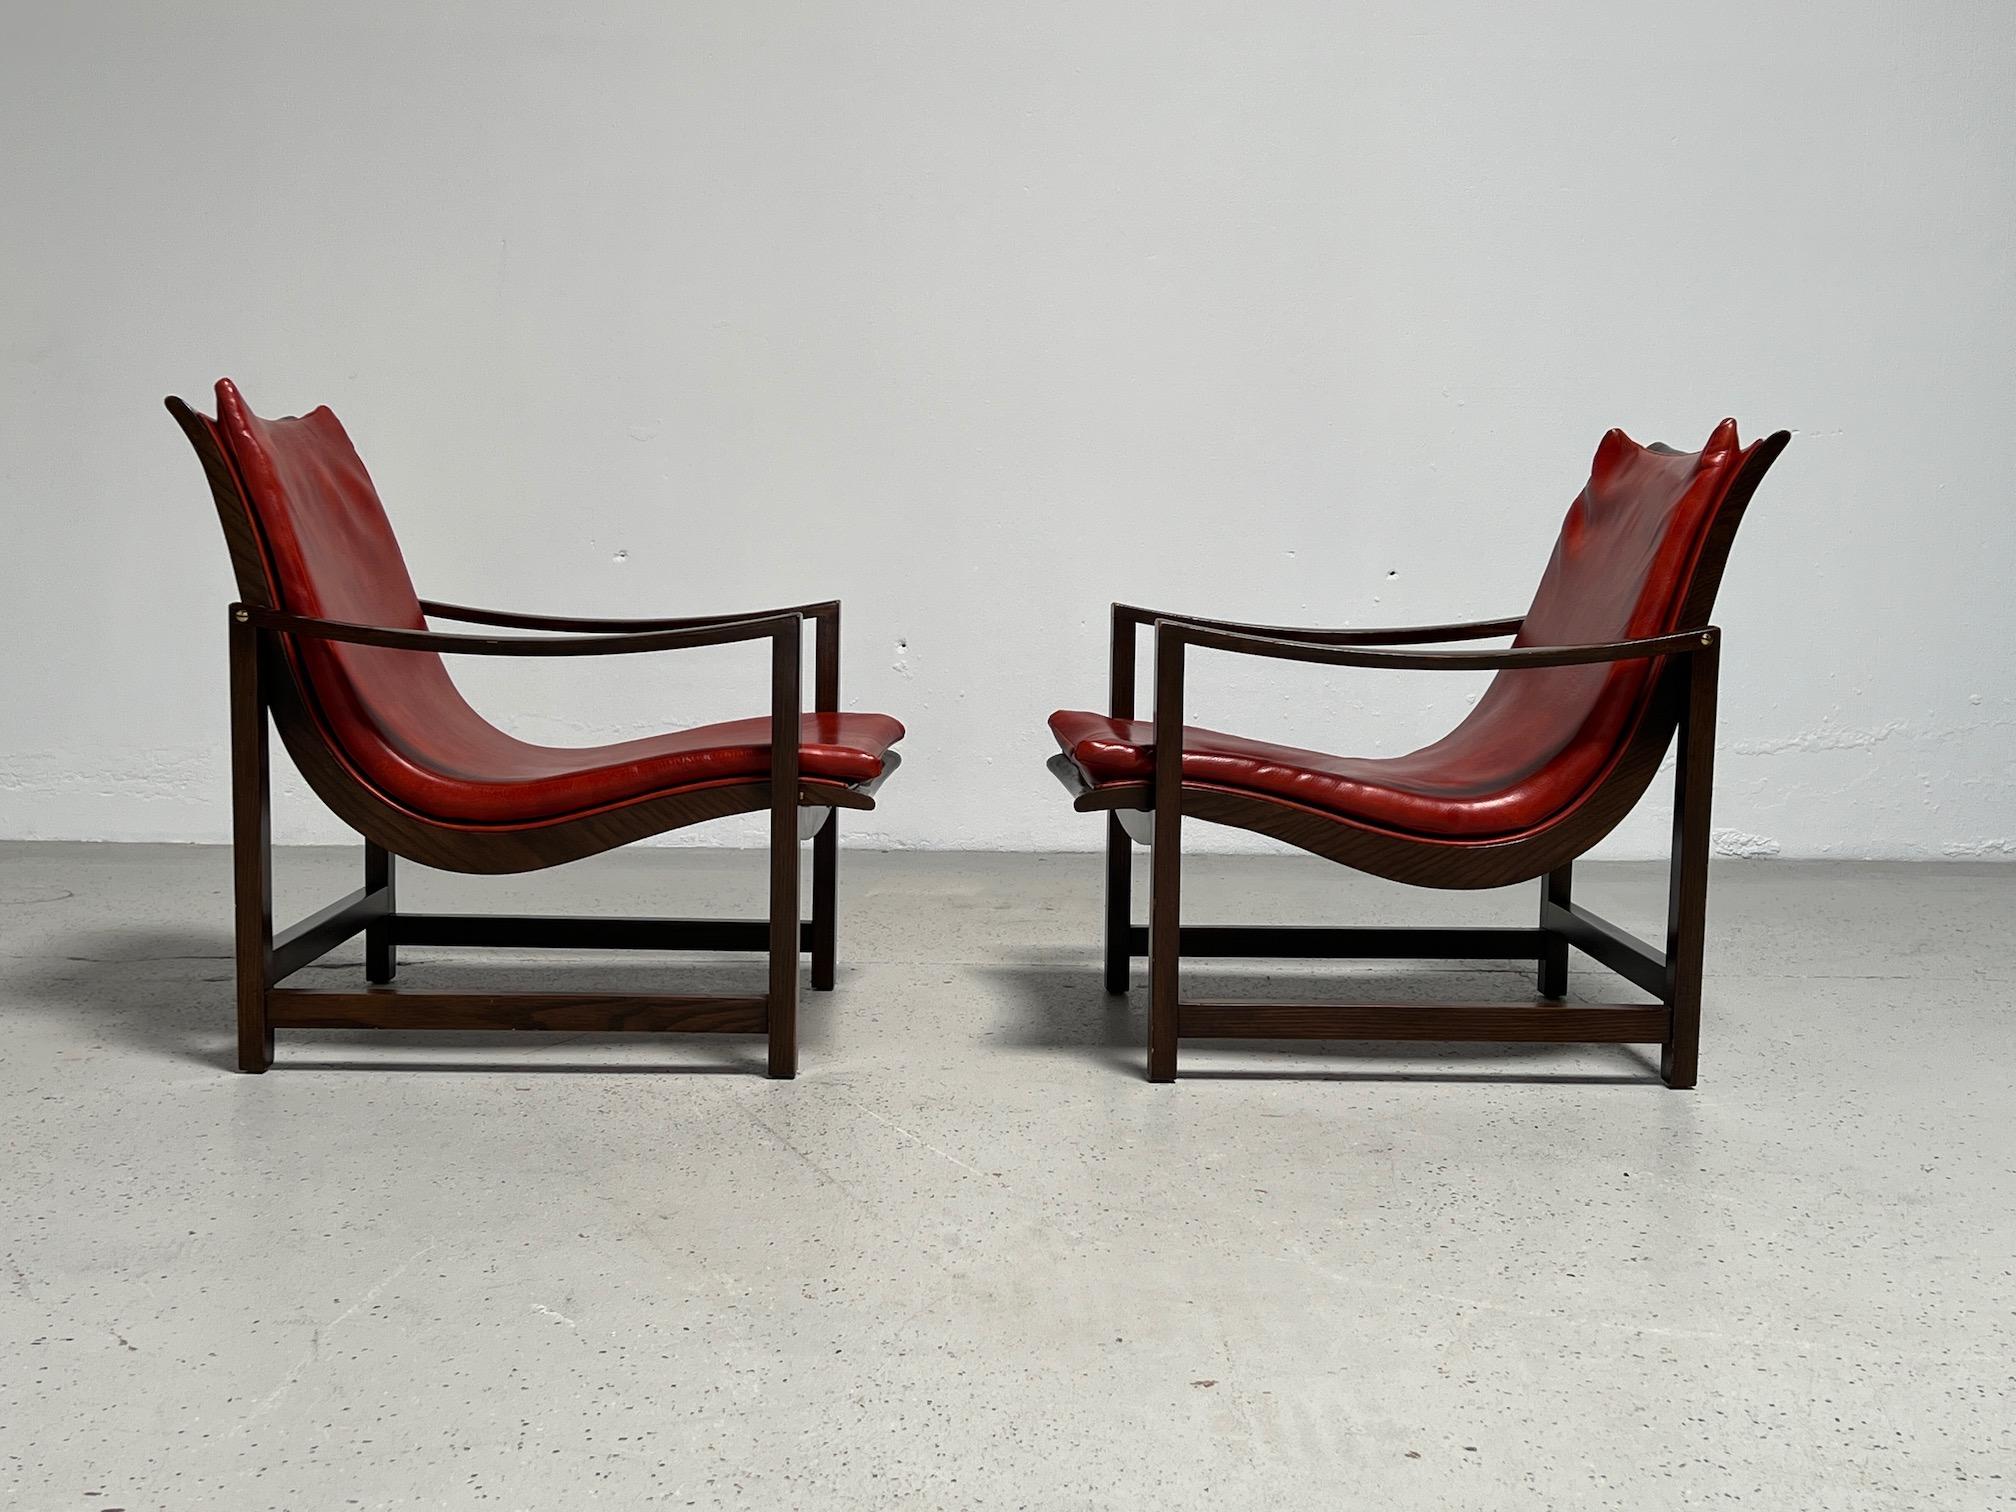 A pair of rare lounge chairs model 609 designed by Edward Wormley for Dunbar. Original leather-like vinyl upholstery on Ash frame with brass hardware.